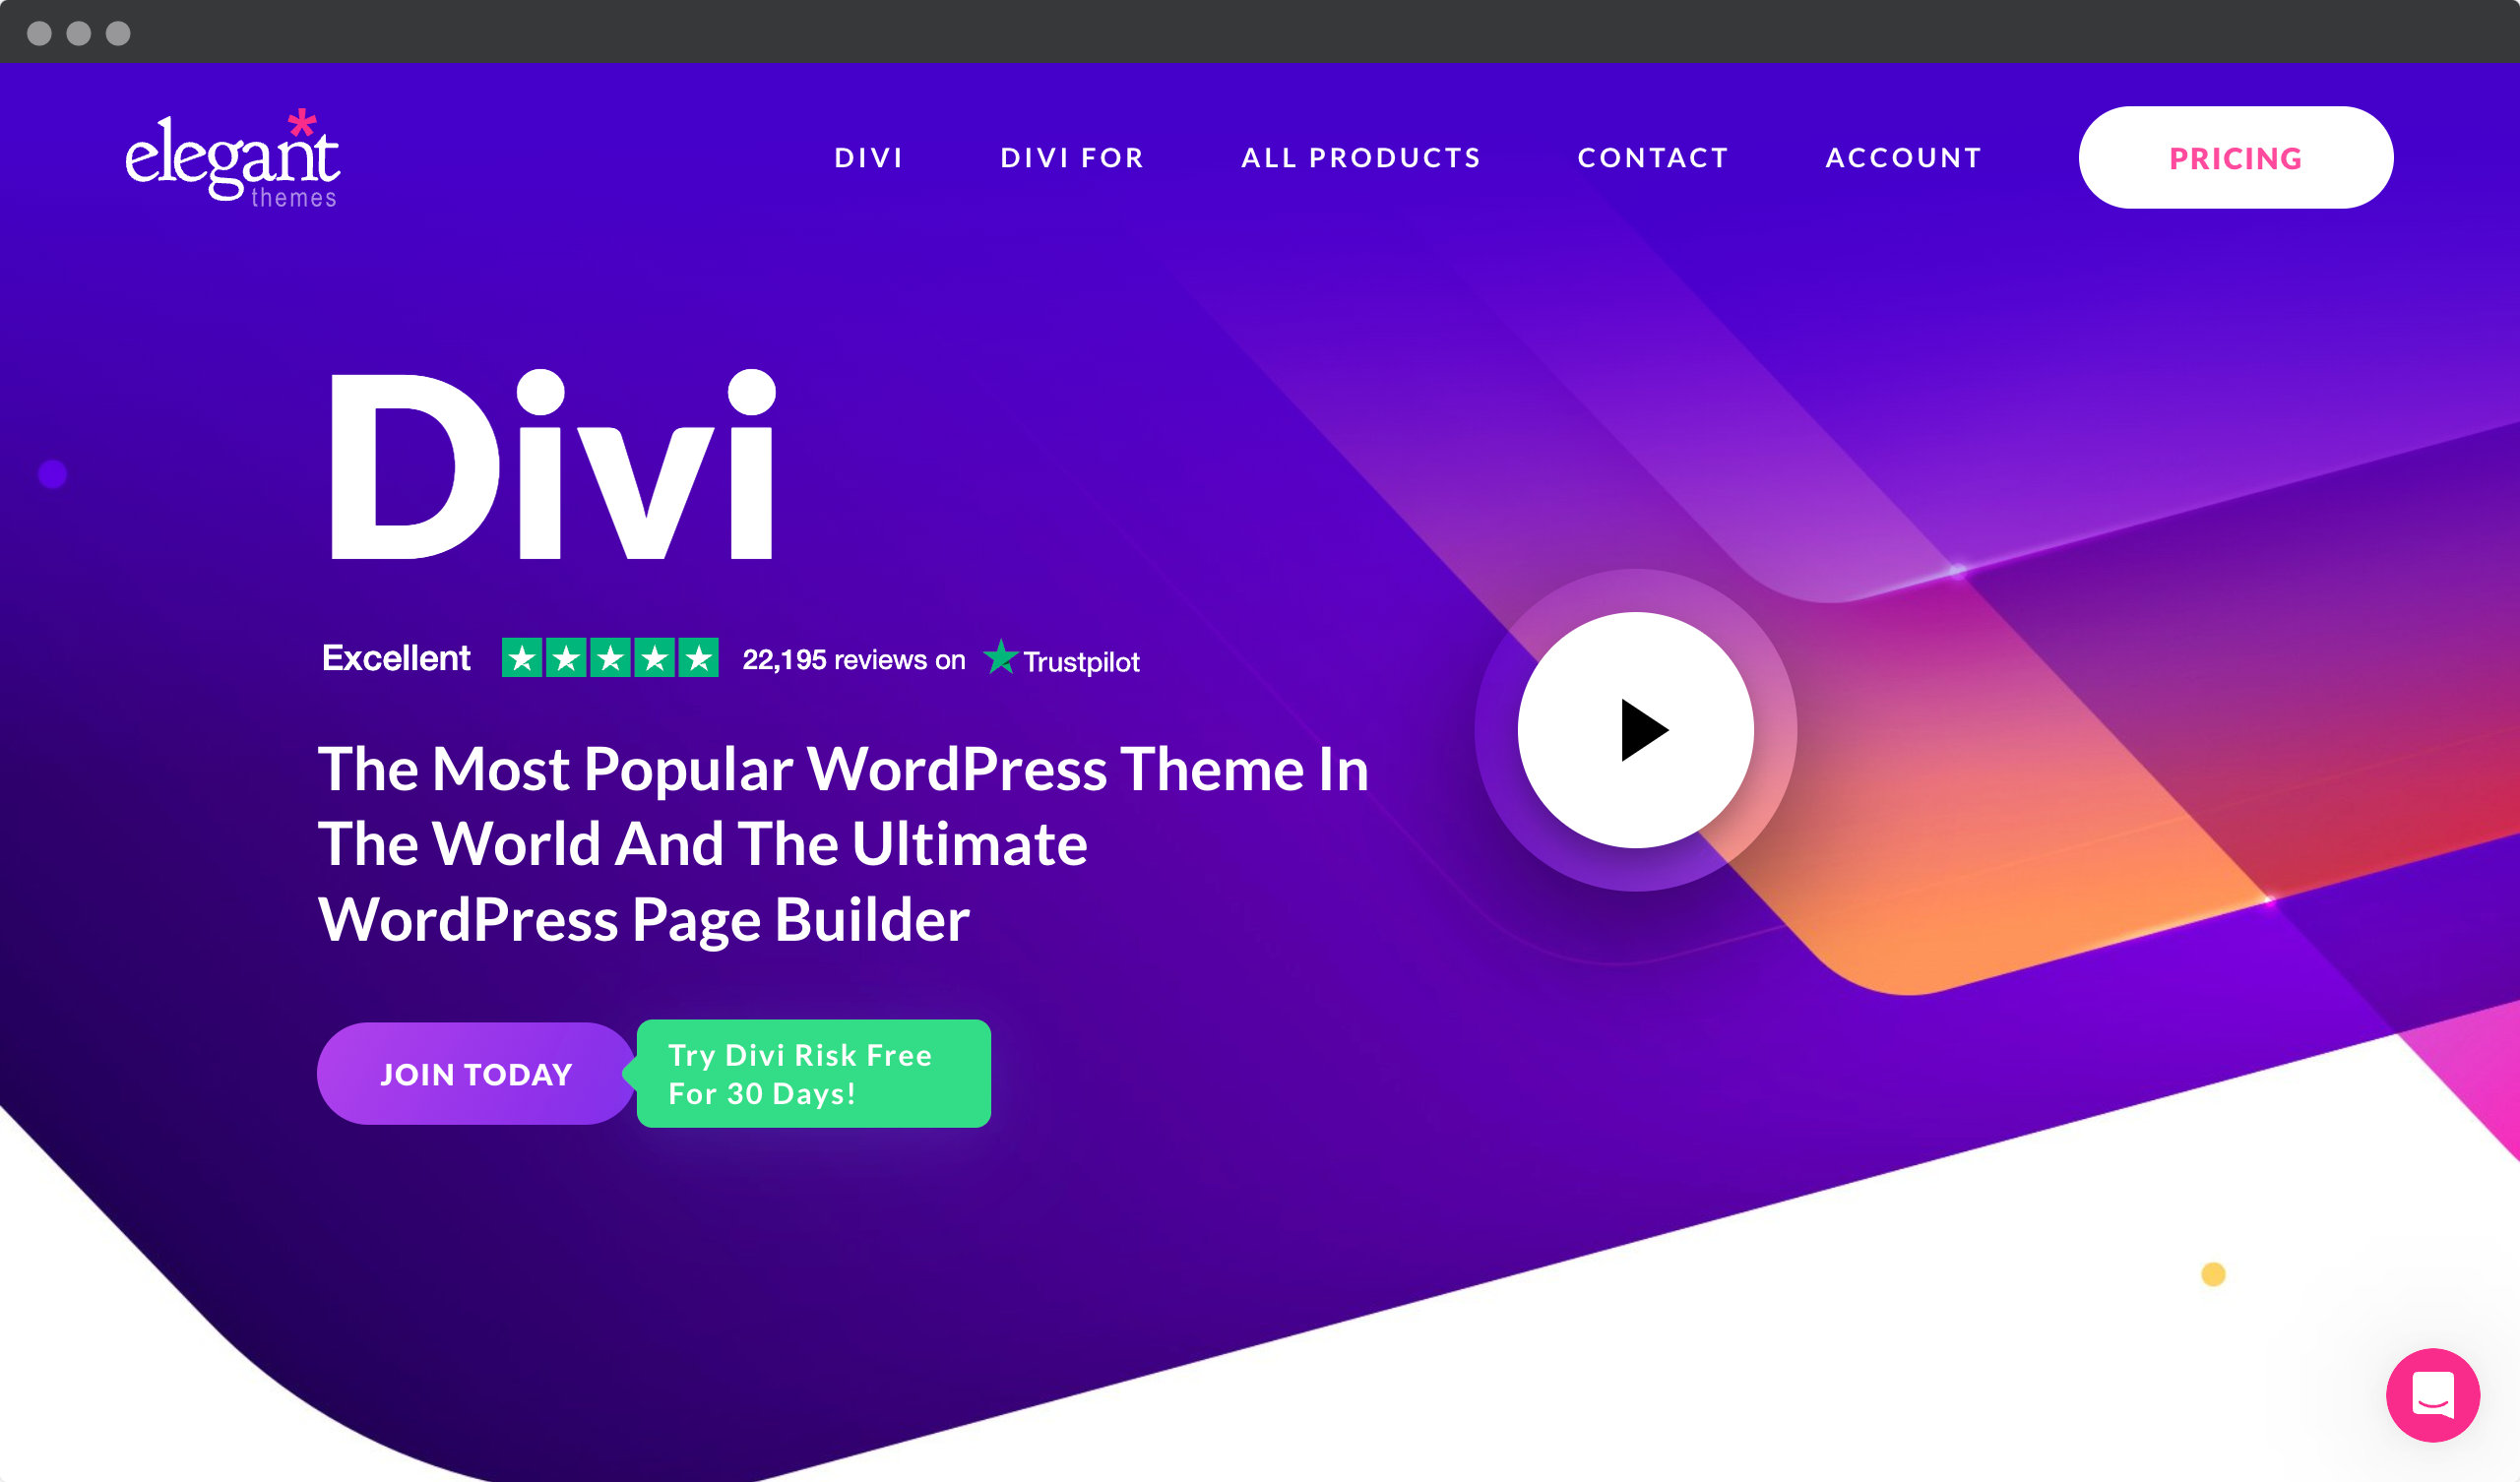 Screenshot of Divi website - Page Builder for WordPress made by Elegant Themes